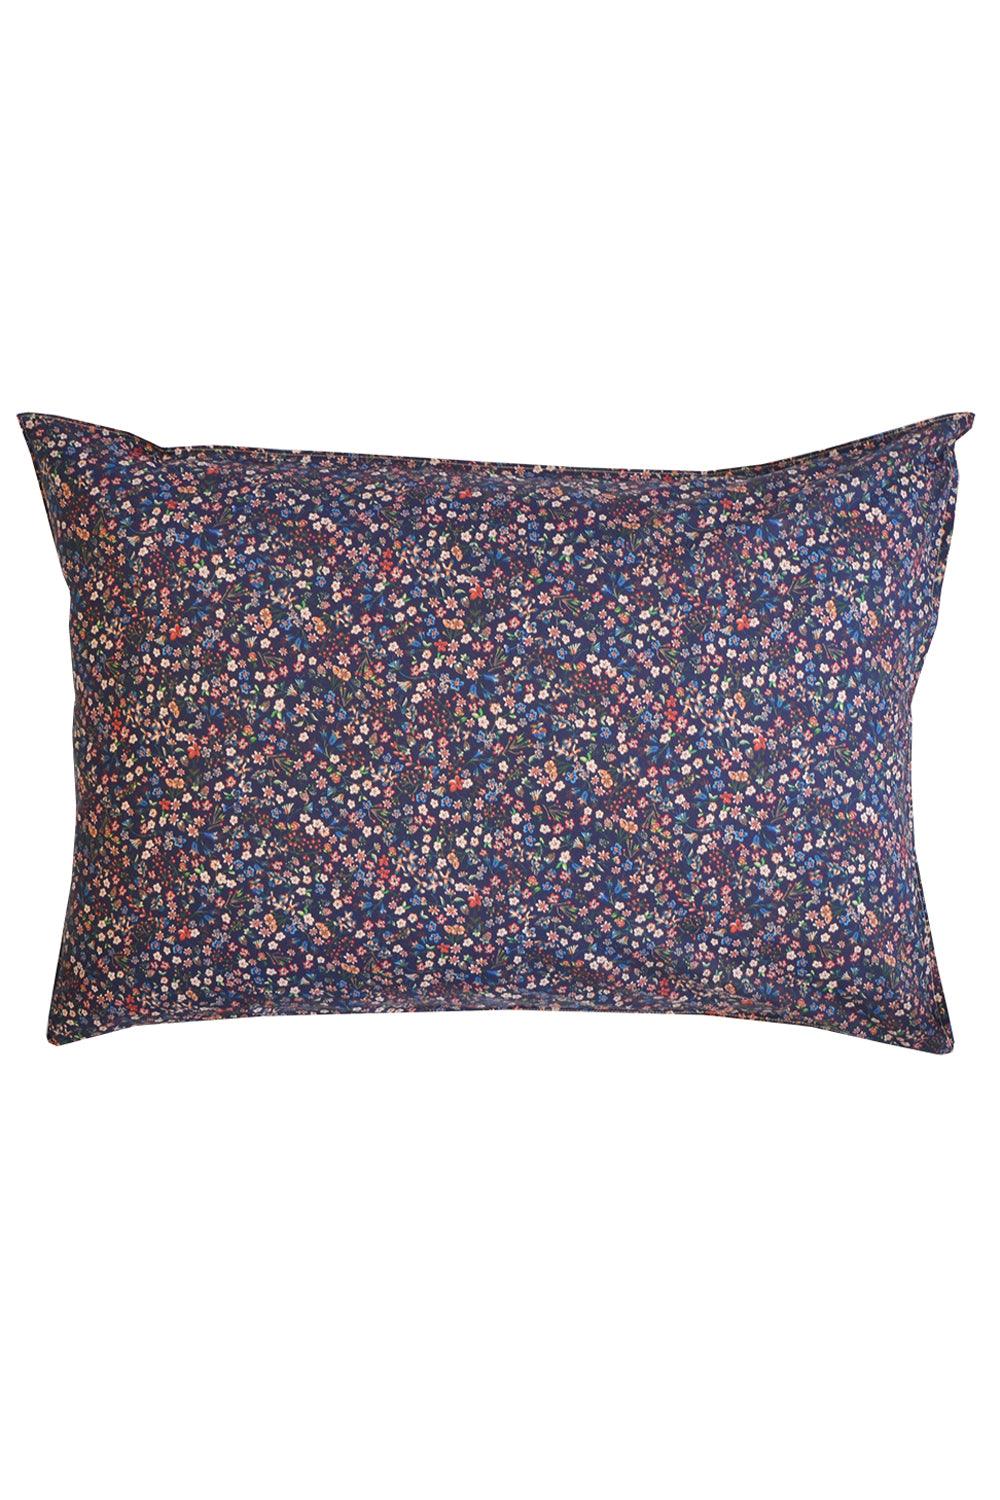 Pillowcase made with Liberty Fabric DONNA LEIGH AUBERGINE - Coco & Wolf